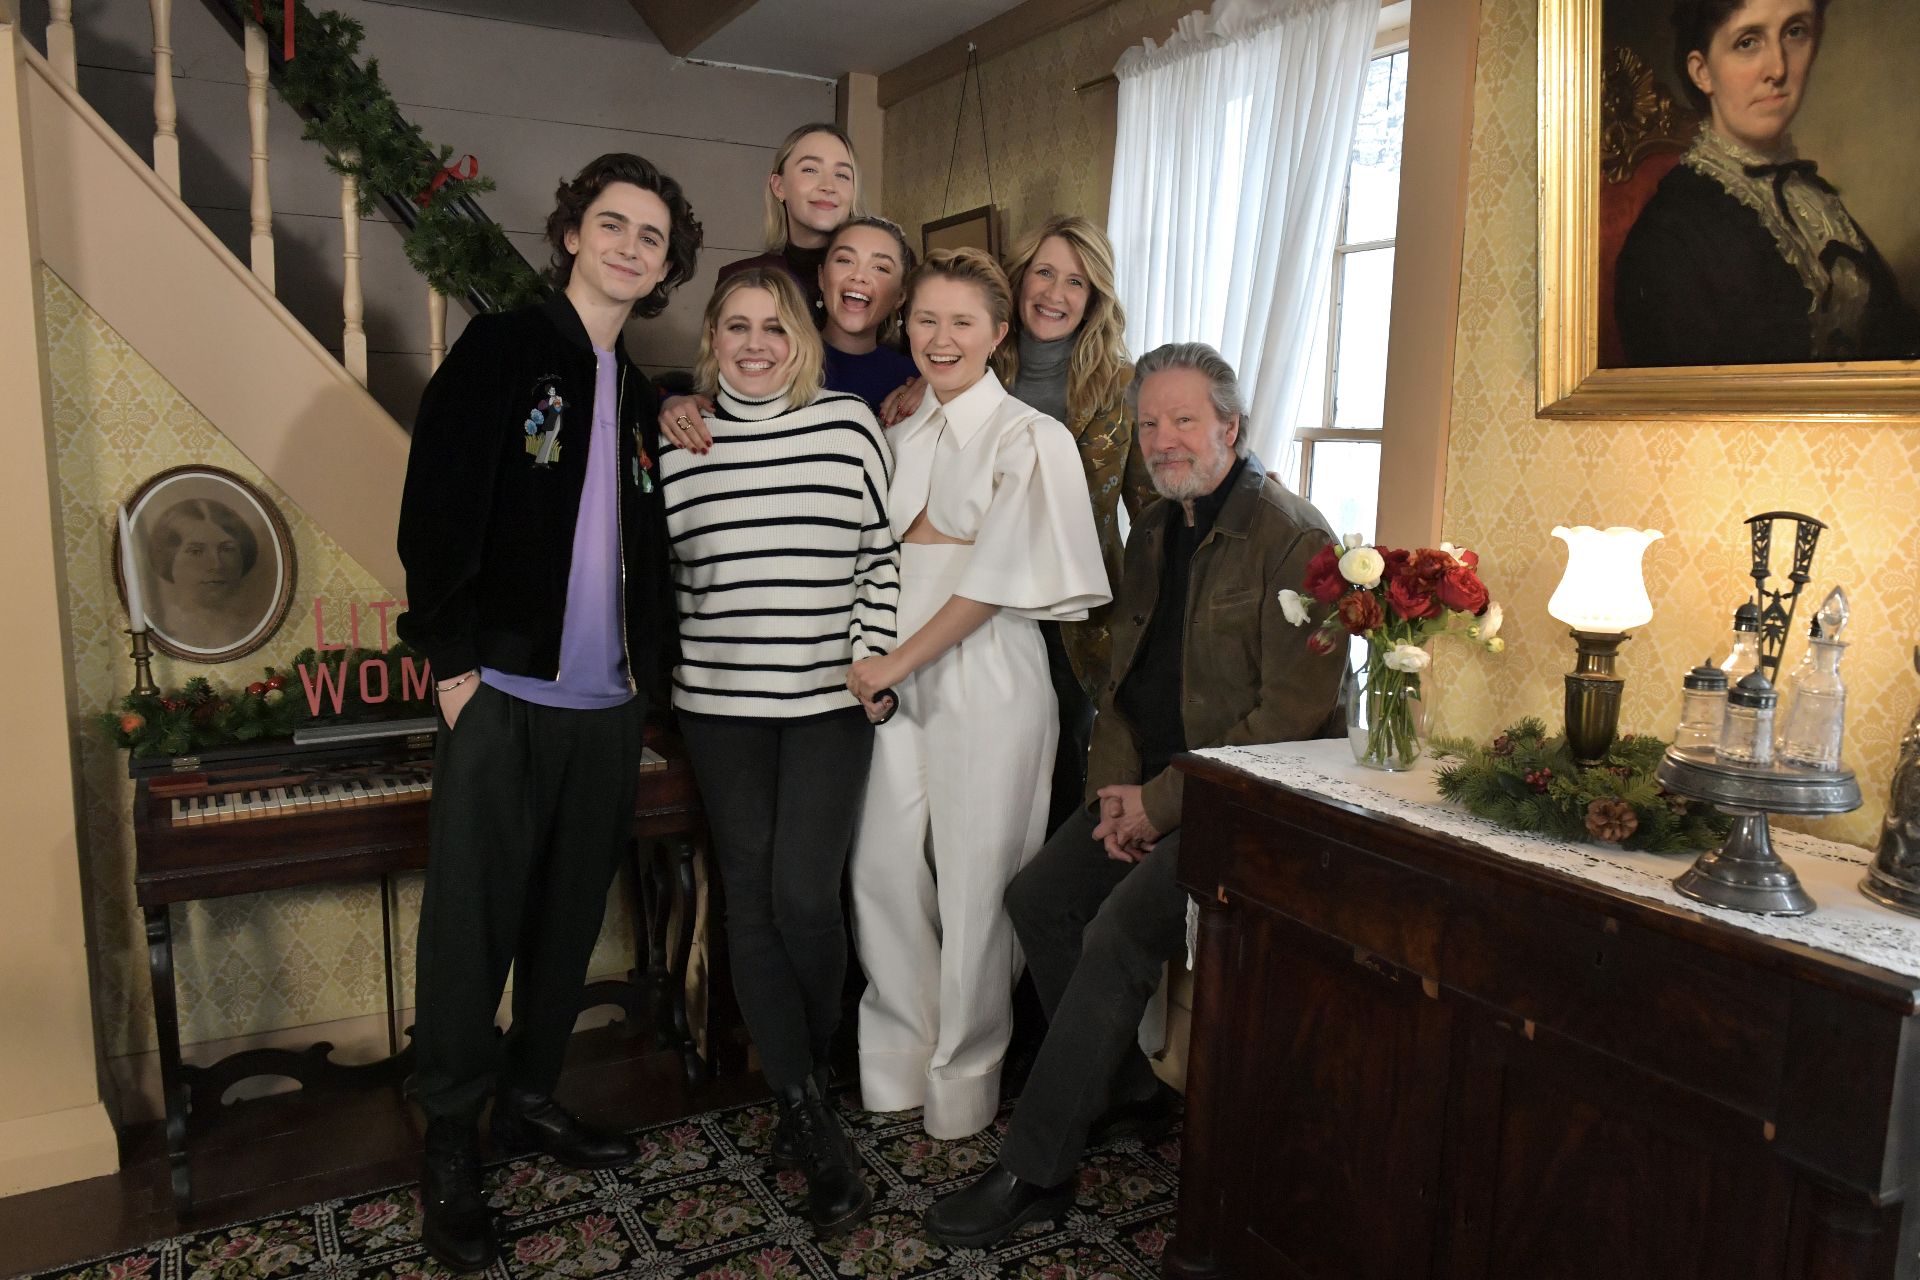 (From left) Timothee Chalamet, writer/director Greta Gerwig '06, Saoirse Ronan, Florence Pugh, Eliza Scanlan, Laura Dern, and Chris Cooper in Concord, MA, at Louisa May Alcott's Orchard House where the author wrote and set 'Little Women.' (Photo courtesy of Sony Pictures Entertainment)